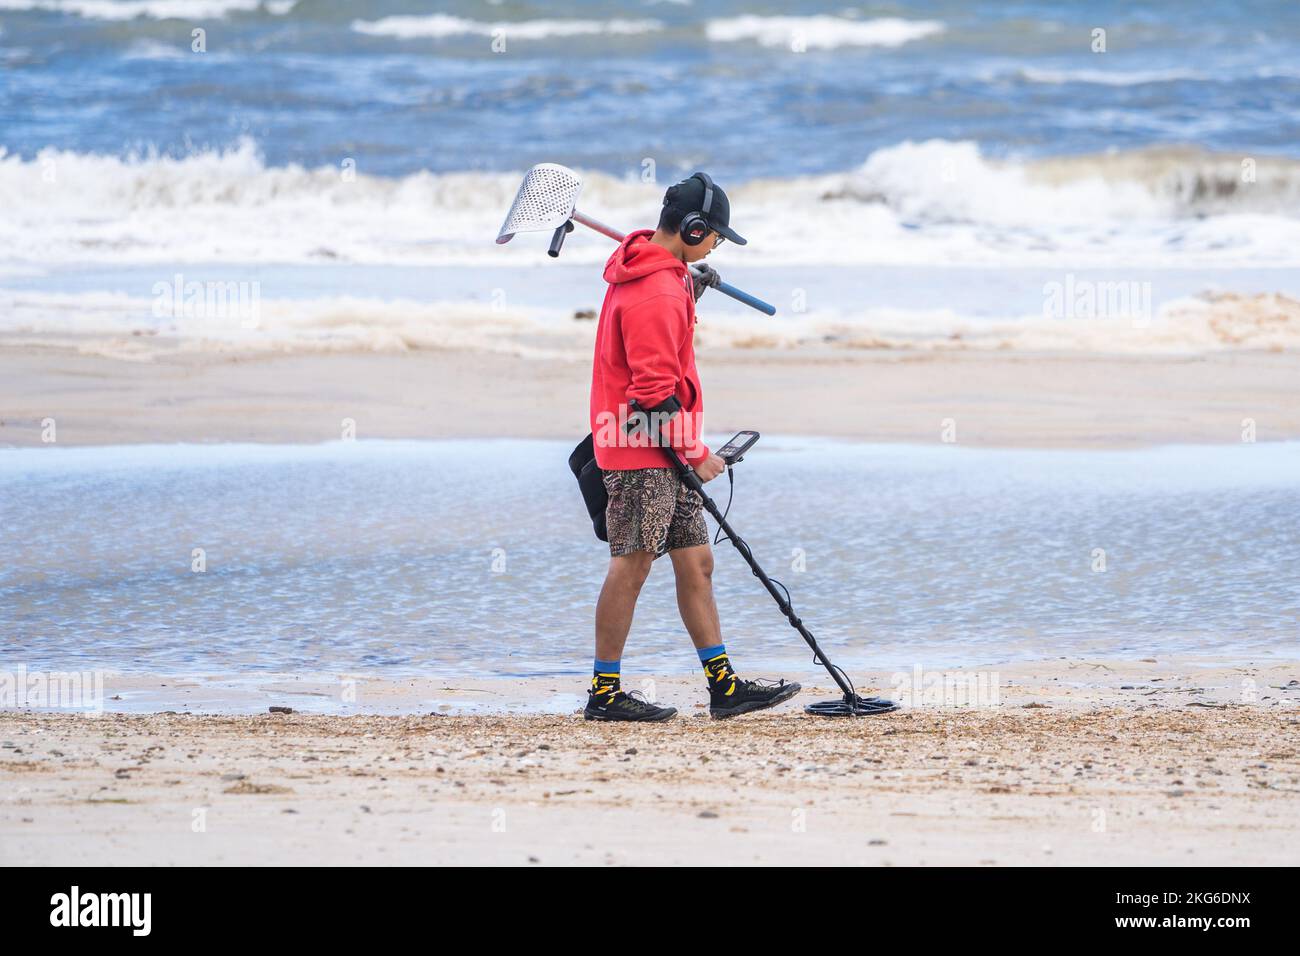 Adelaide, Australia. 22 November 2022.  A metal detectorist scouring the beach in Adelaide, South Australia  on a mild sunny day following several days of unsettled weather as temperatures are forecast to rise to mid 20celsius. Credit: amer ghazzal/Alamy Live News Stock Photo